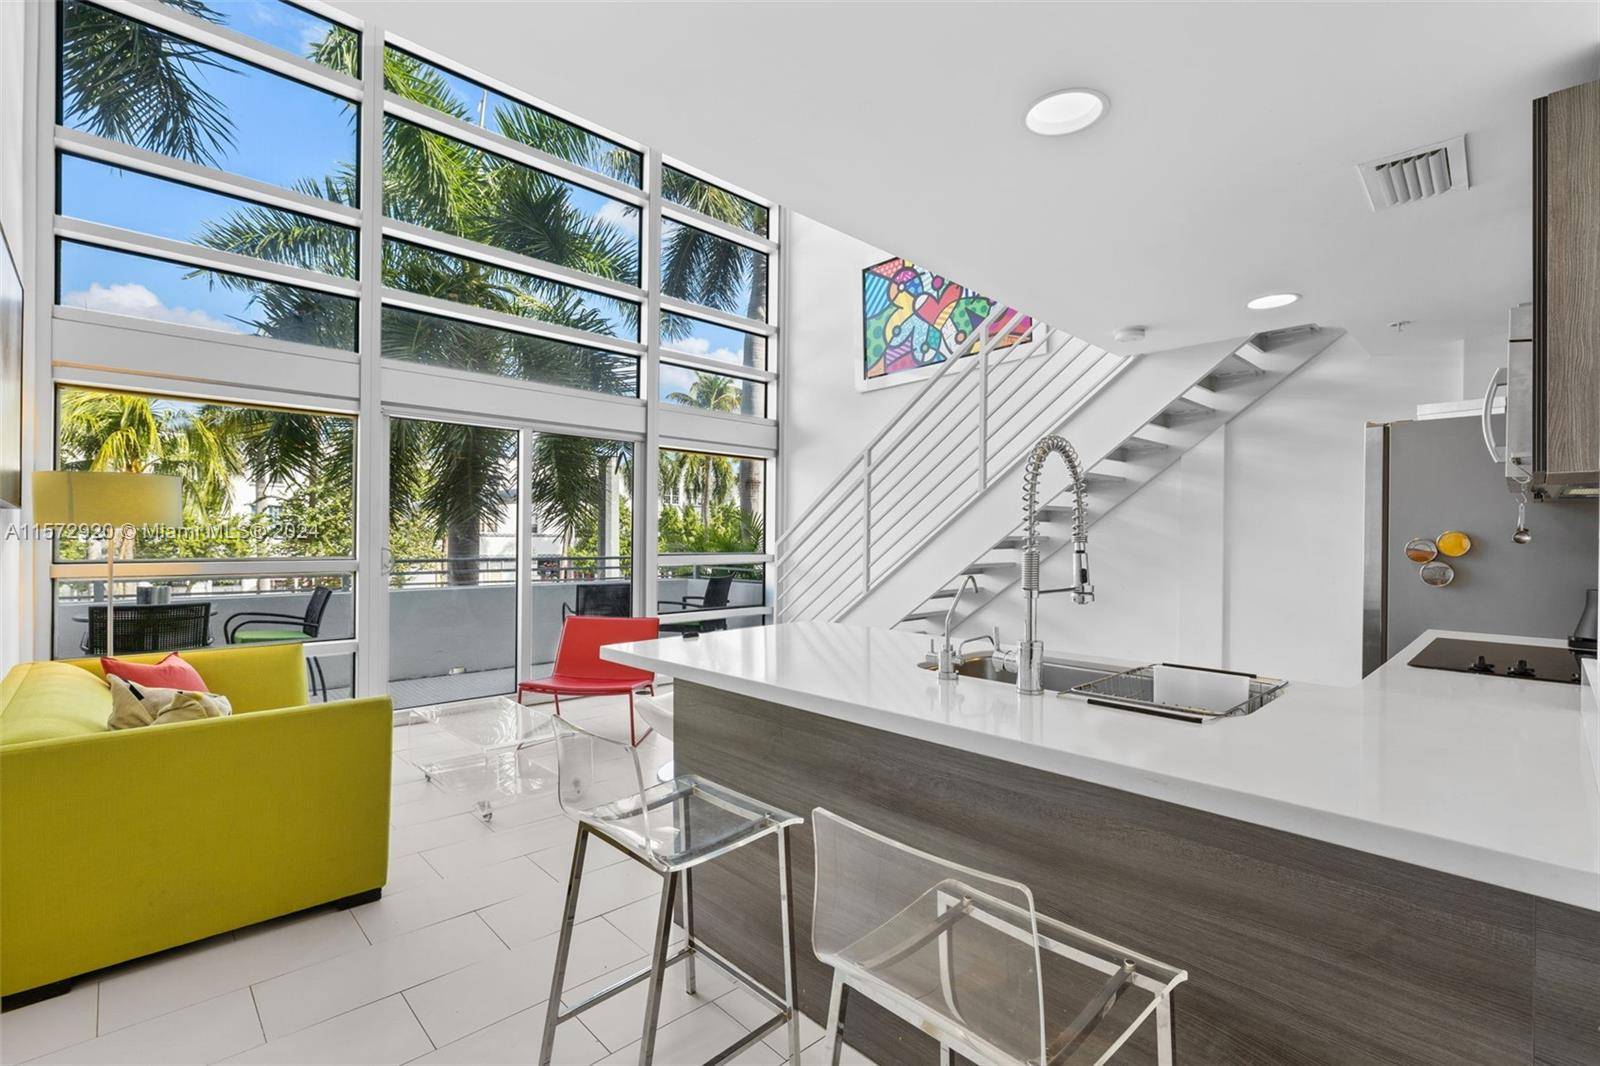 Discover modern beachside living at this stunning 2 bedroom, 2 bathroom condo located at 421 Meridian Avenue, Unit 6, in Miami Beach.